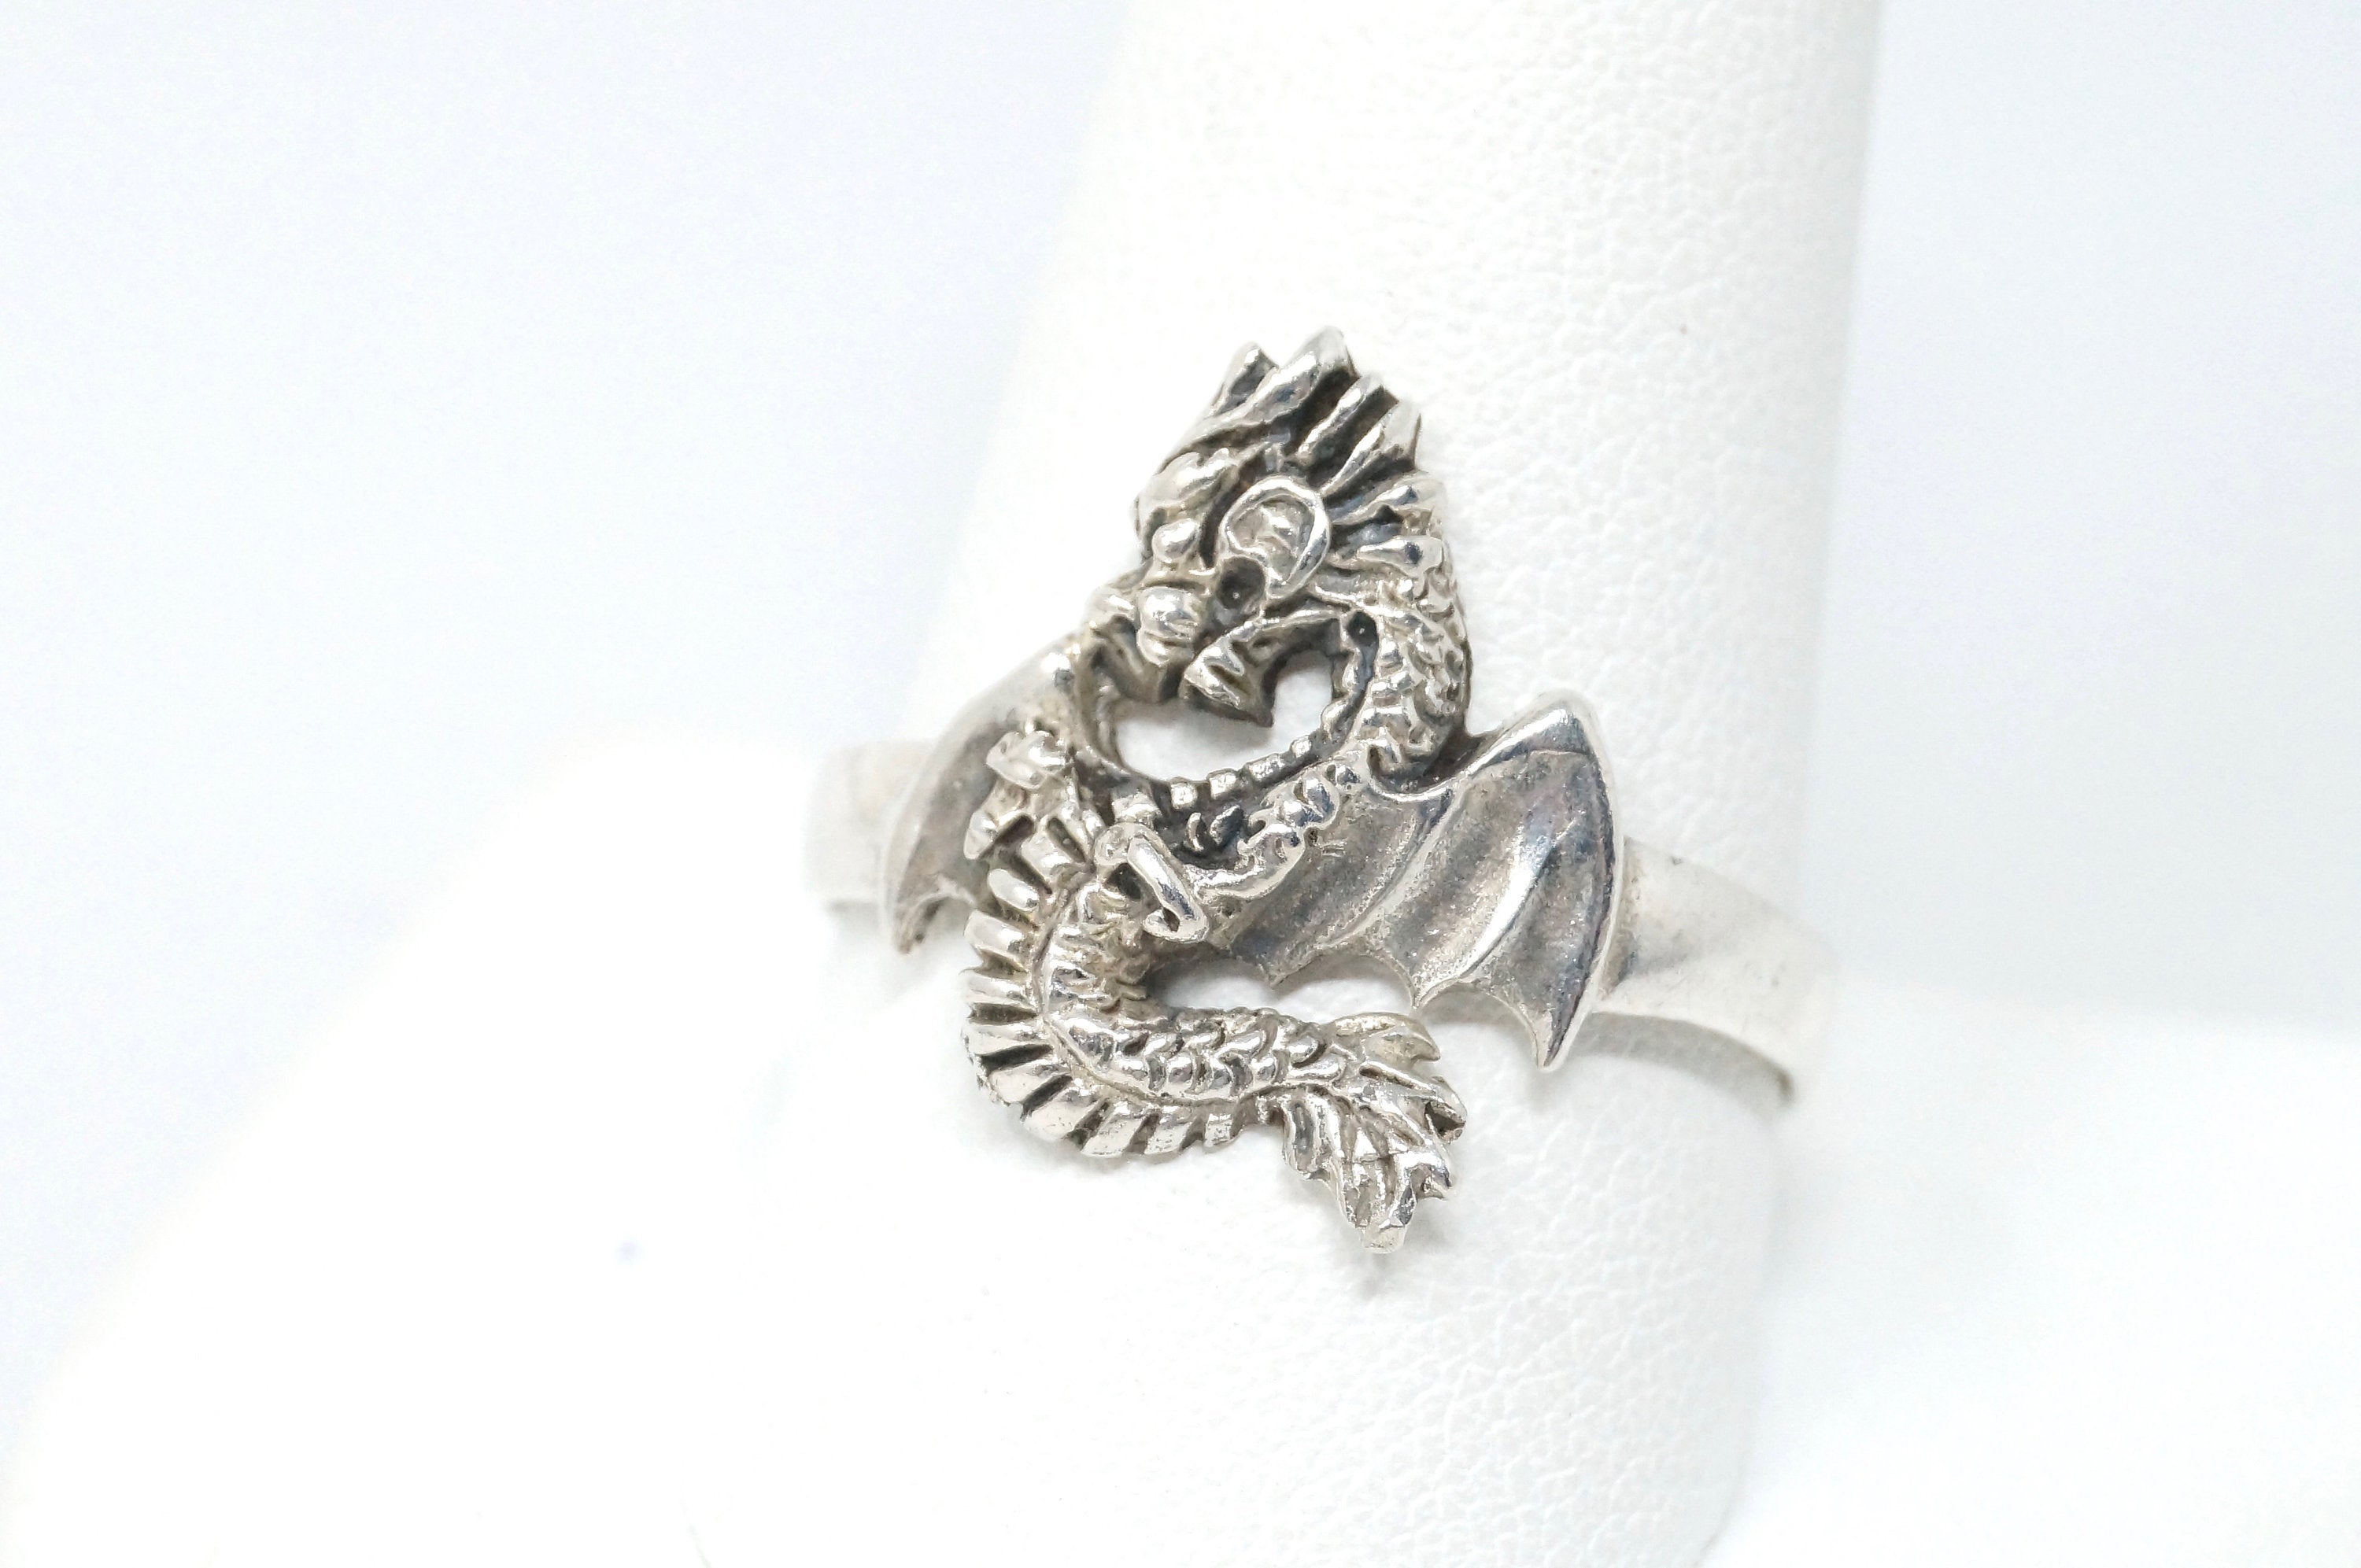 Amazing Vintage Flying Magical Dragon Sterling Silver Ring - Size 11